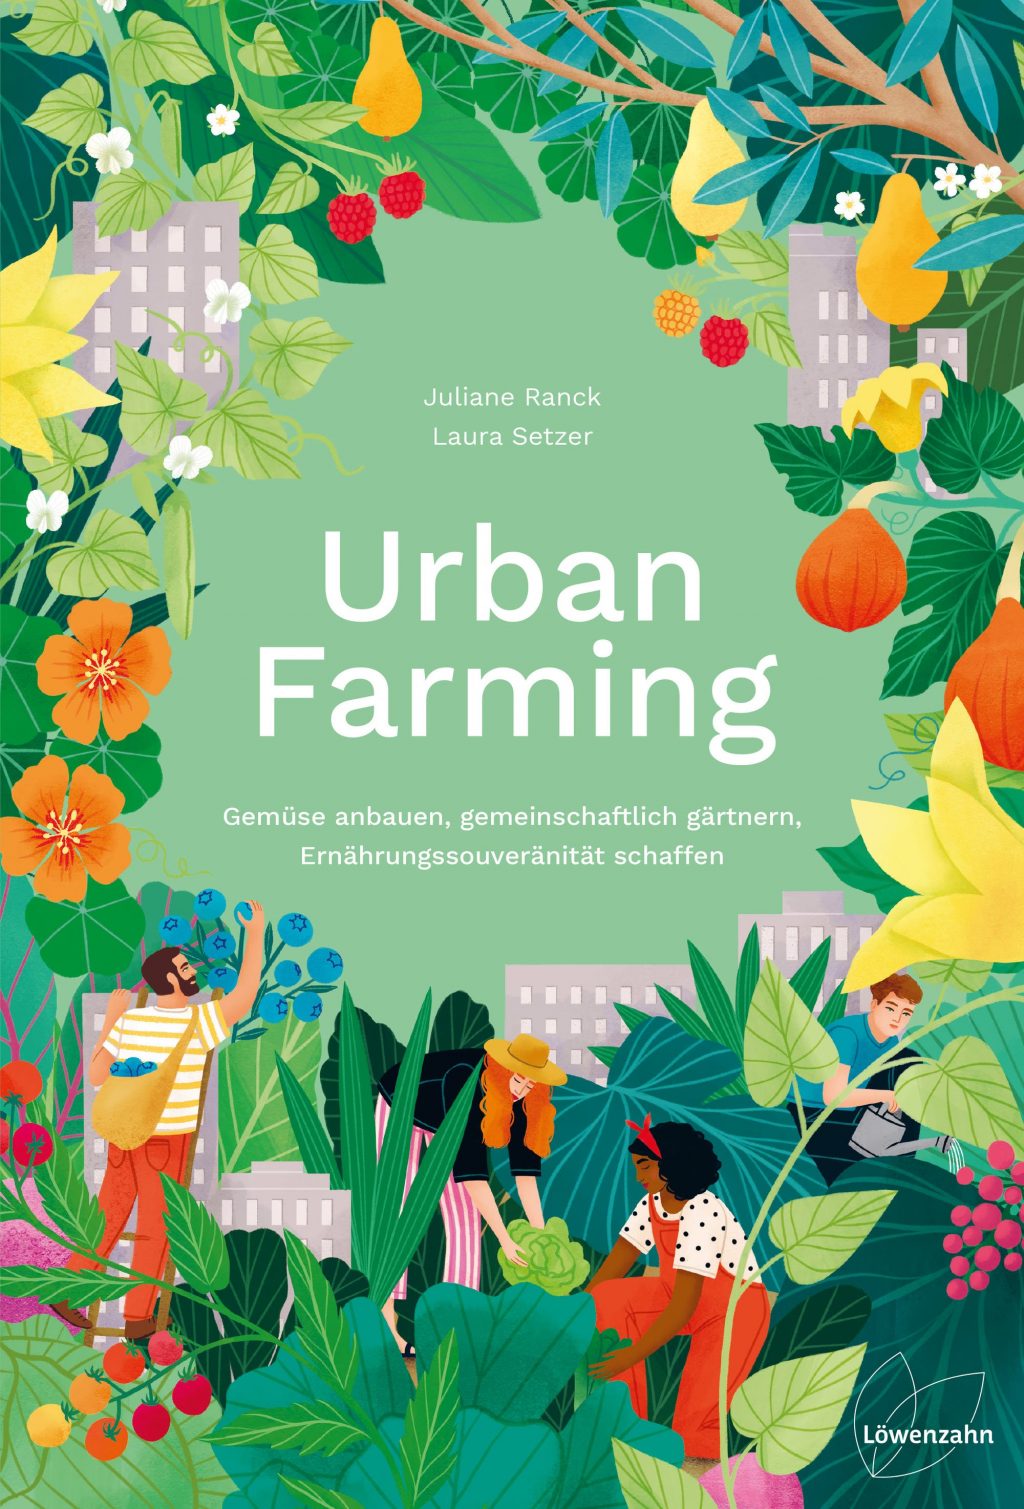 Book review on urban agriculture - a spectrum of science